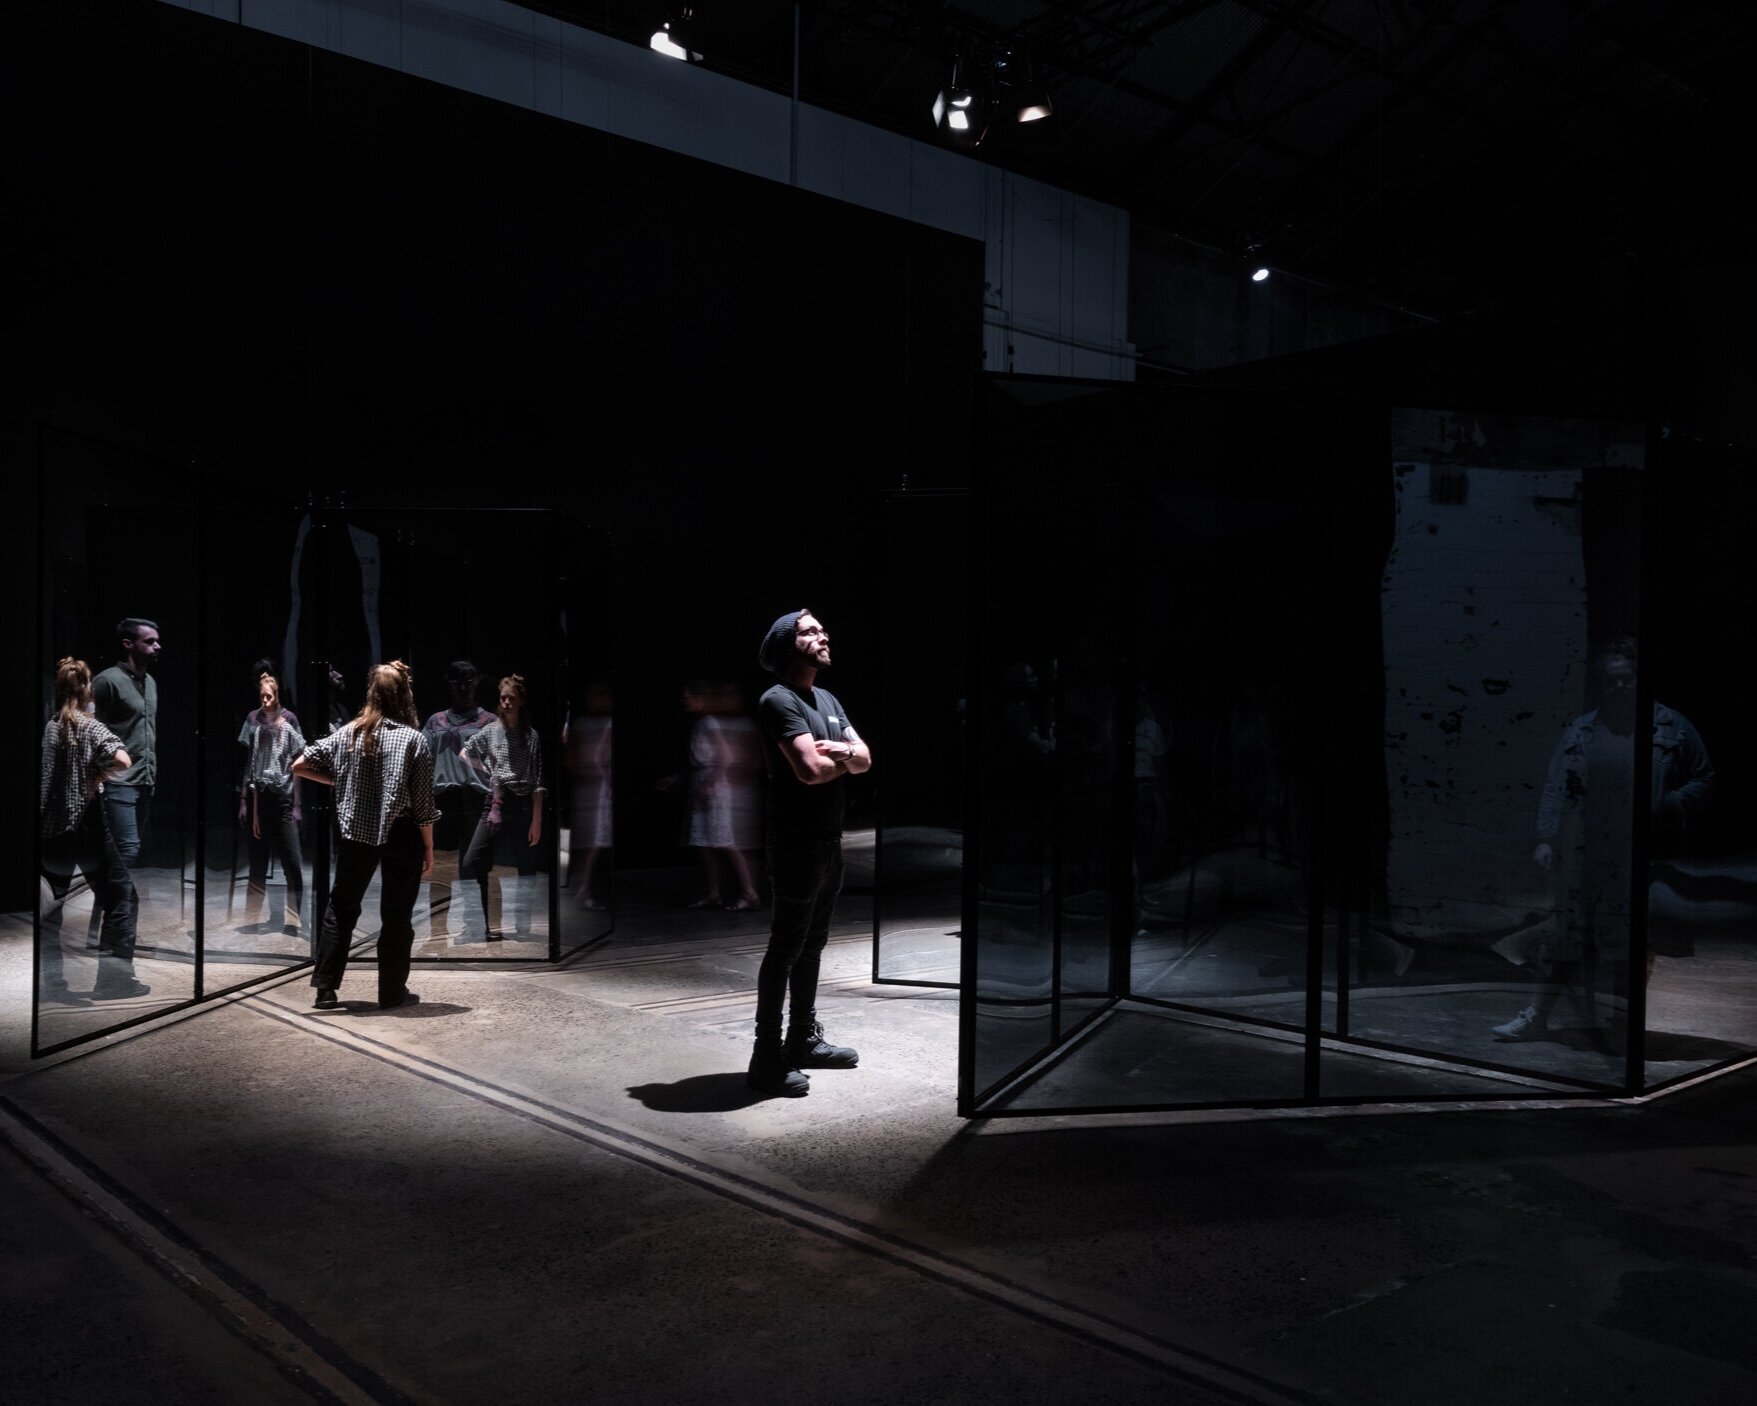   Giselle Stanborough: Cinopticon , exhibition installation view, Carriageworks, Sydney, 2020; courtesy the artist and Carriageworks, Sydney; photo: Mark Pokorny 